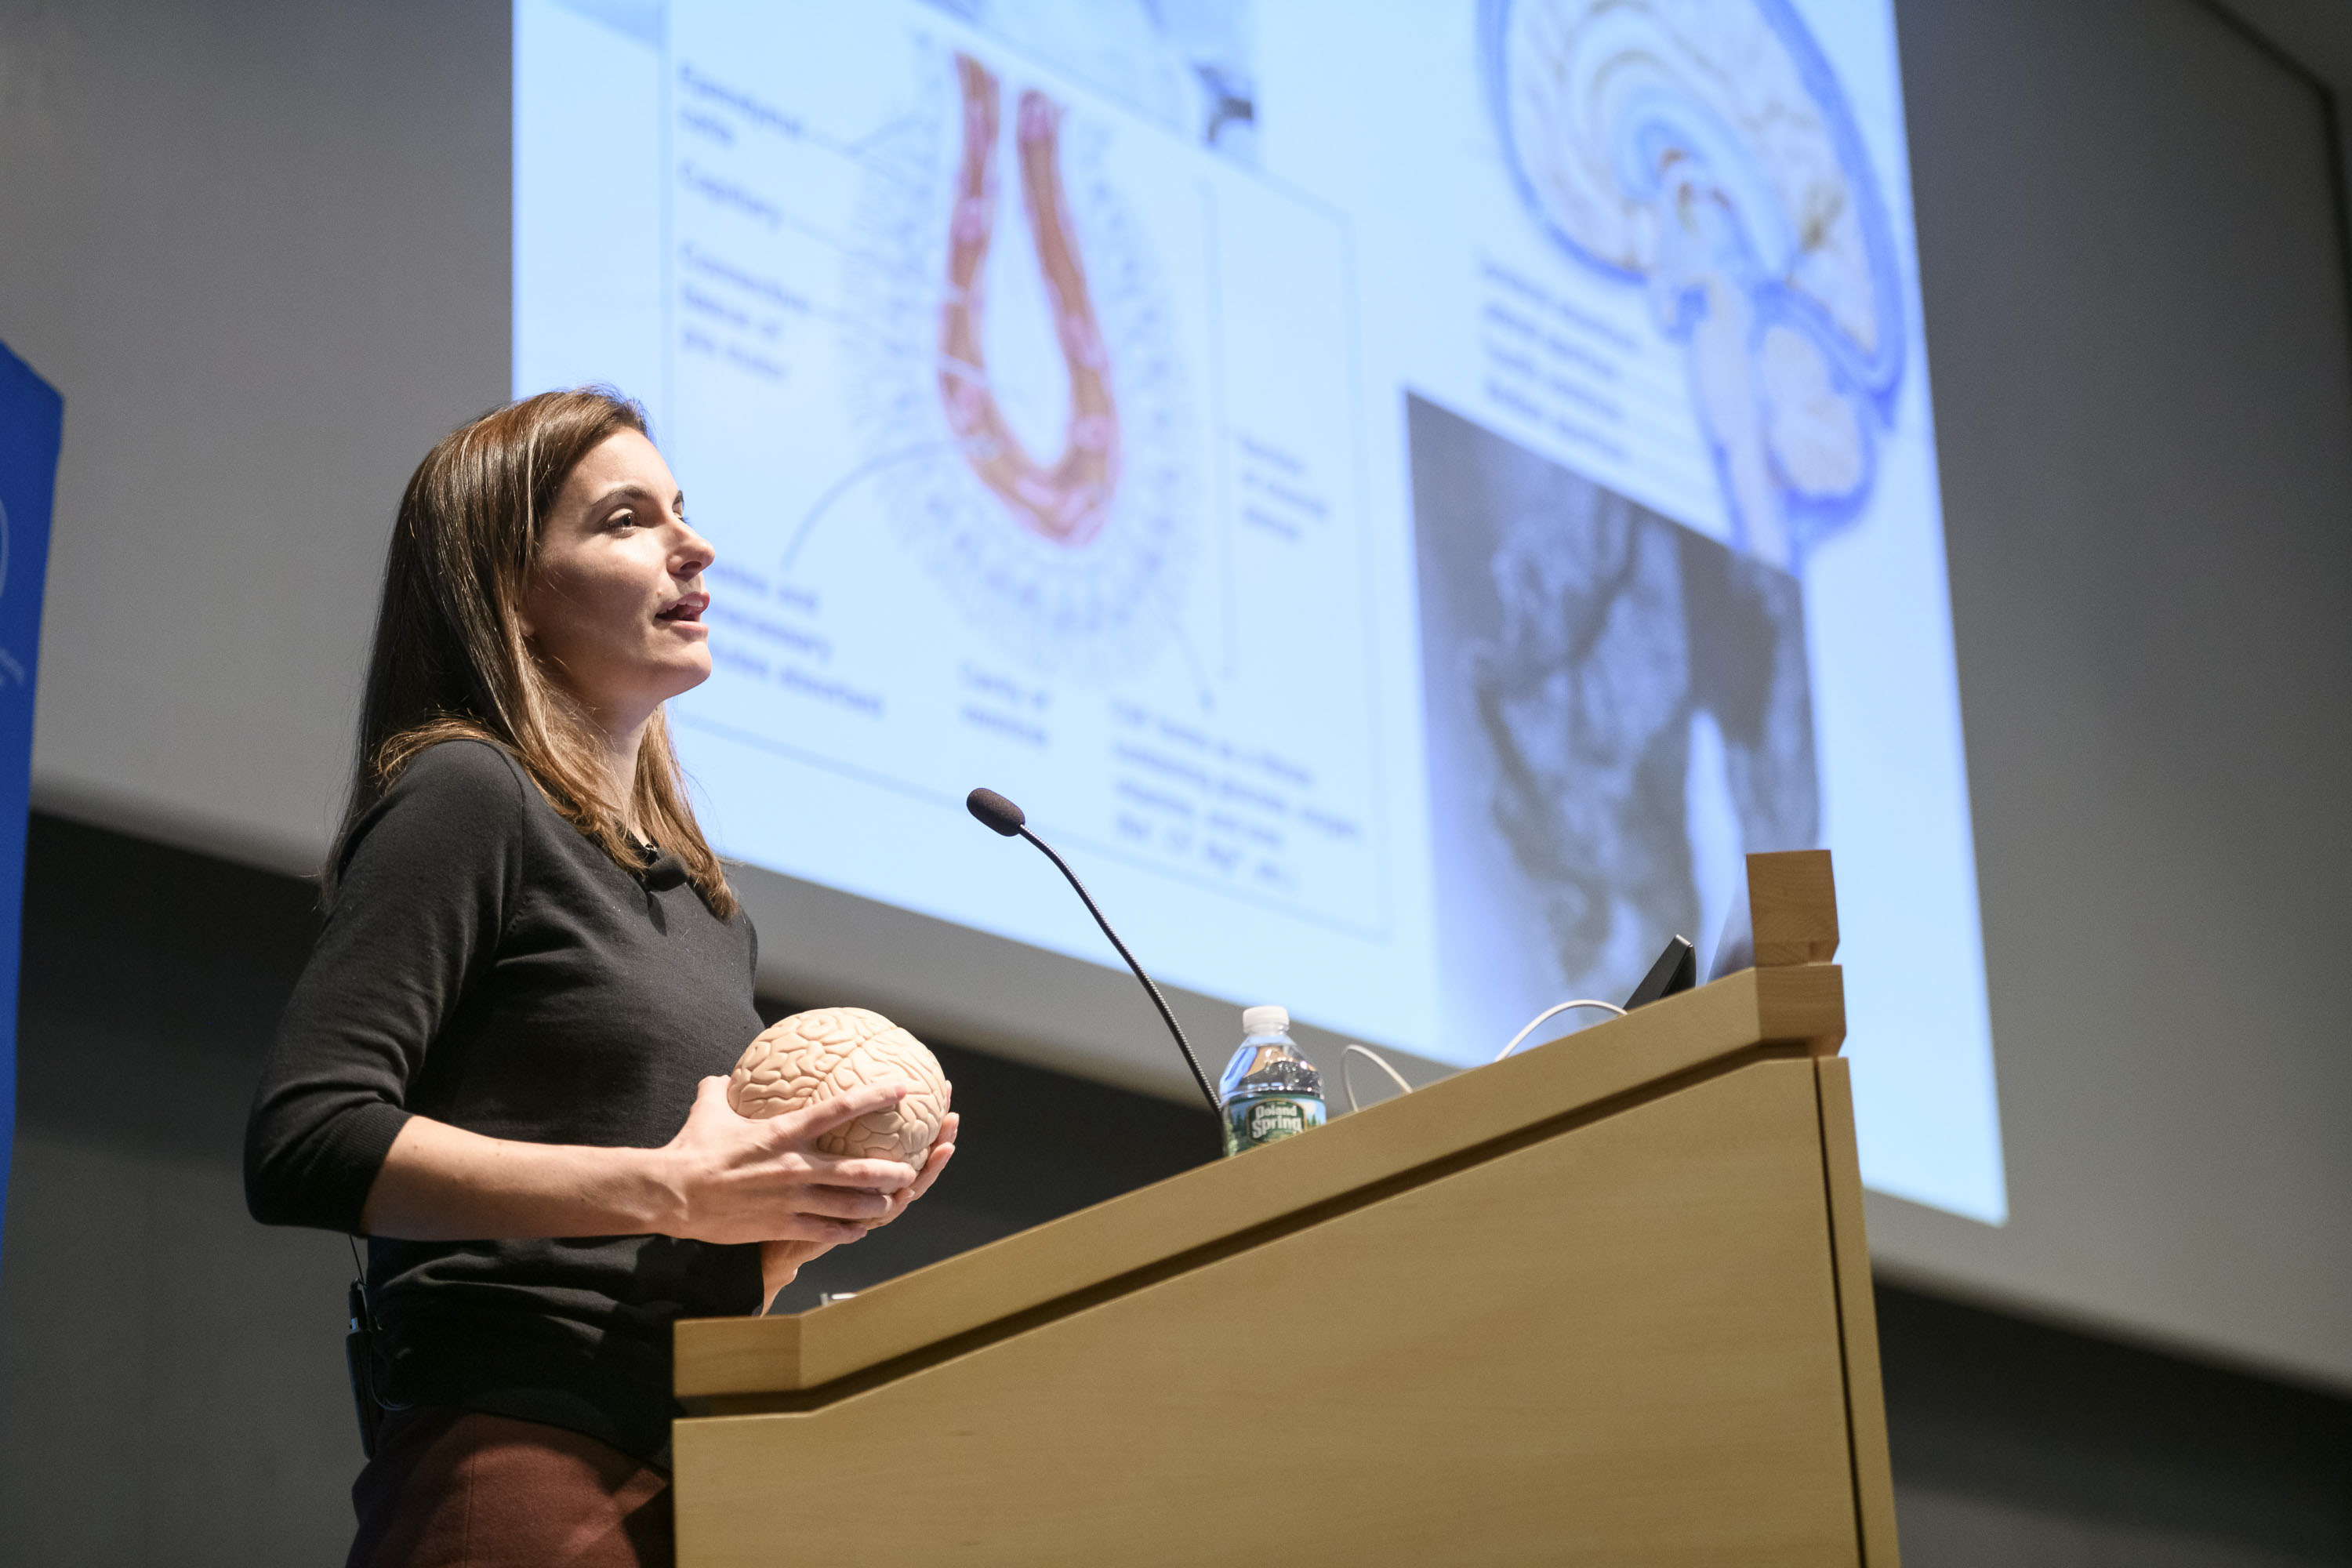 Cancer biologist Adrienne Boire presents her work at the Major Trends Conference